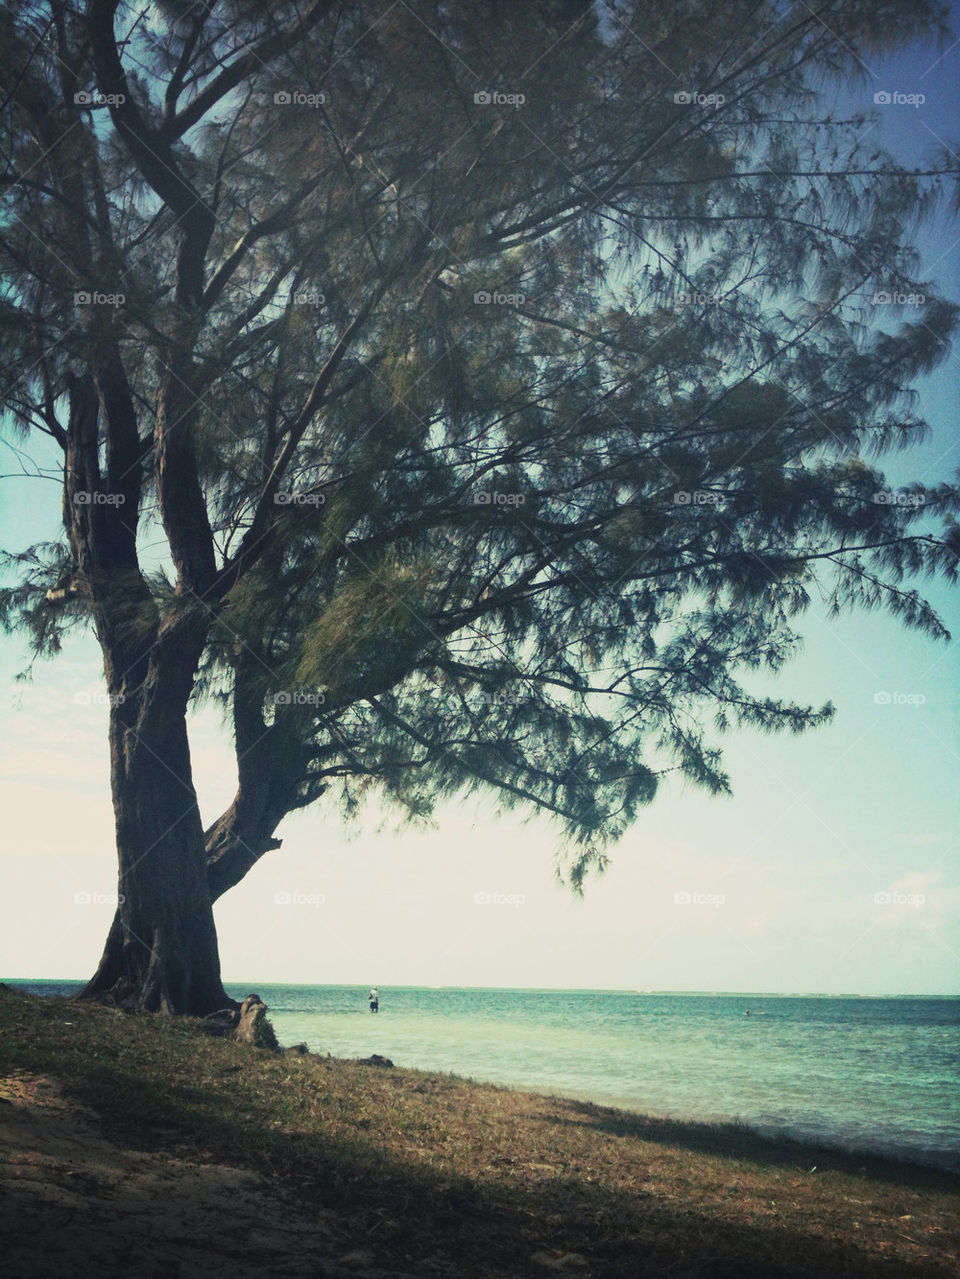 Tree on the shores of Mauritius island.